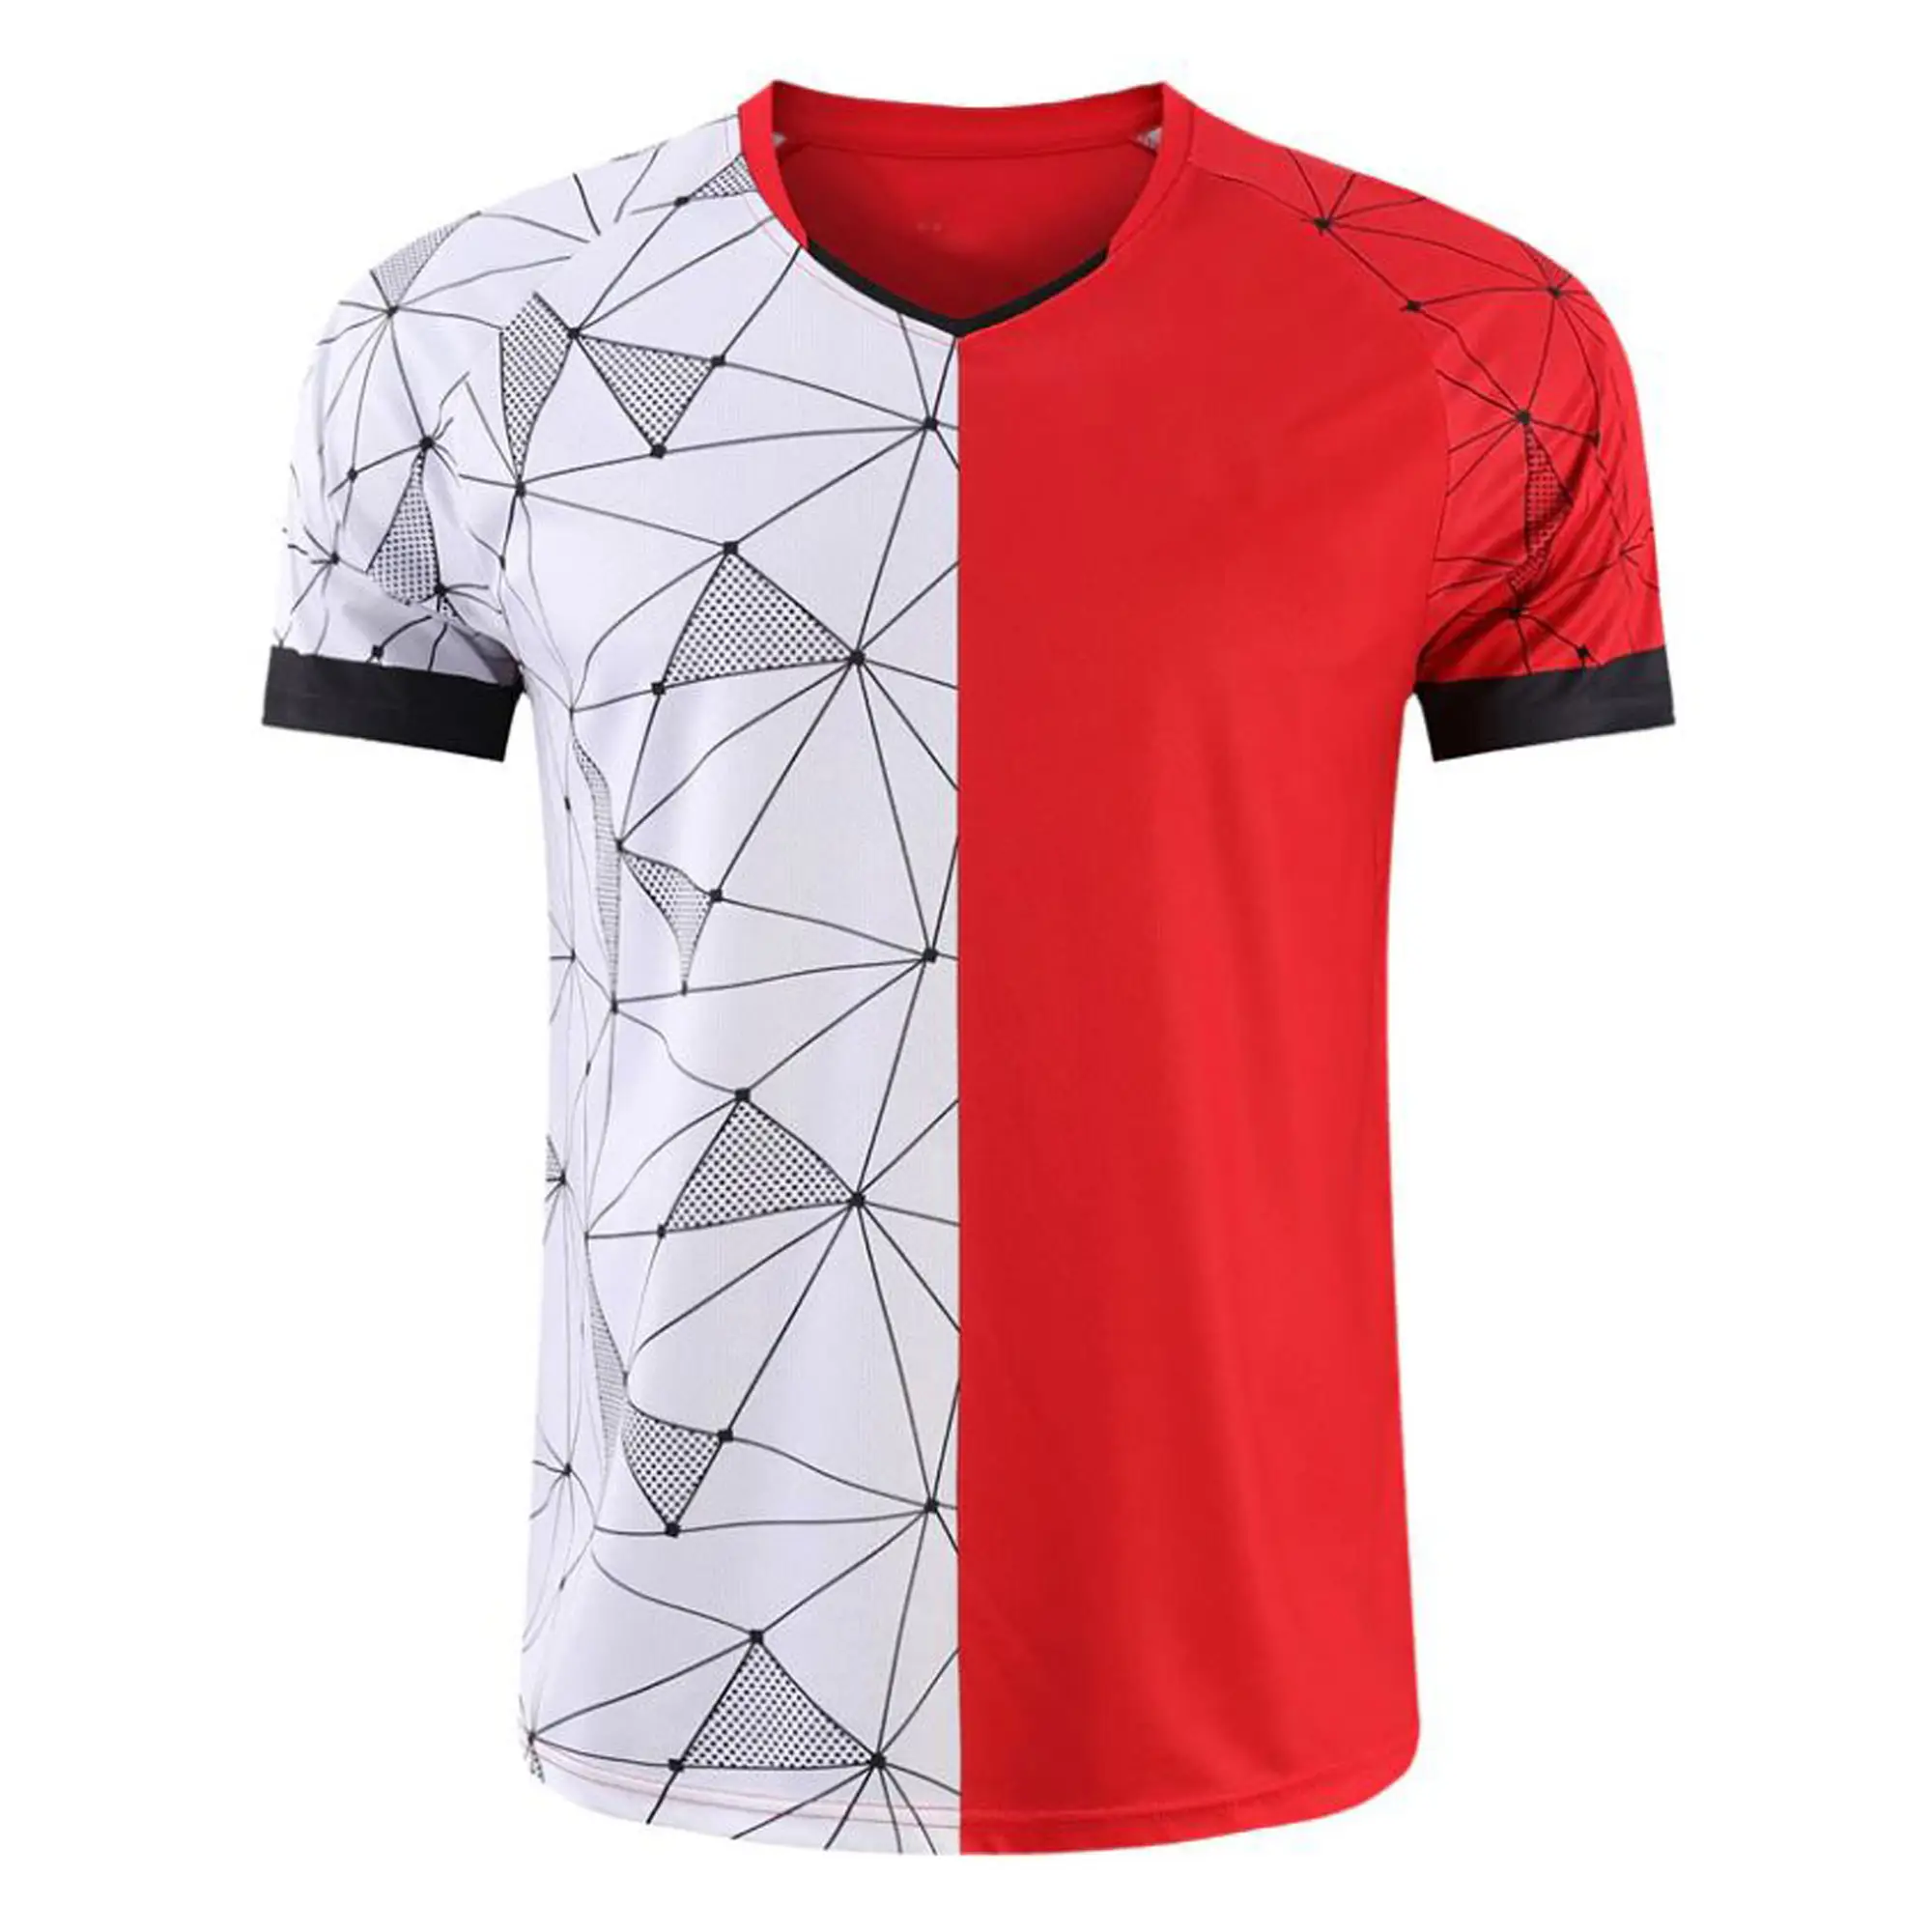 Whole sale manufacturers and suppliers of soccer football jersey short sleeve training wear t shirt